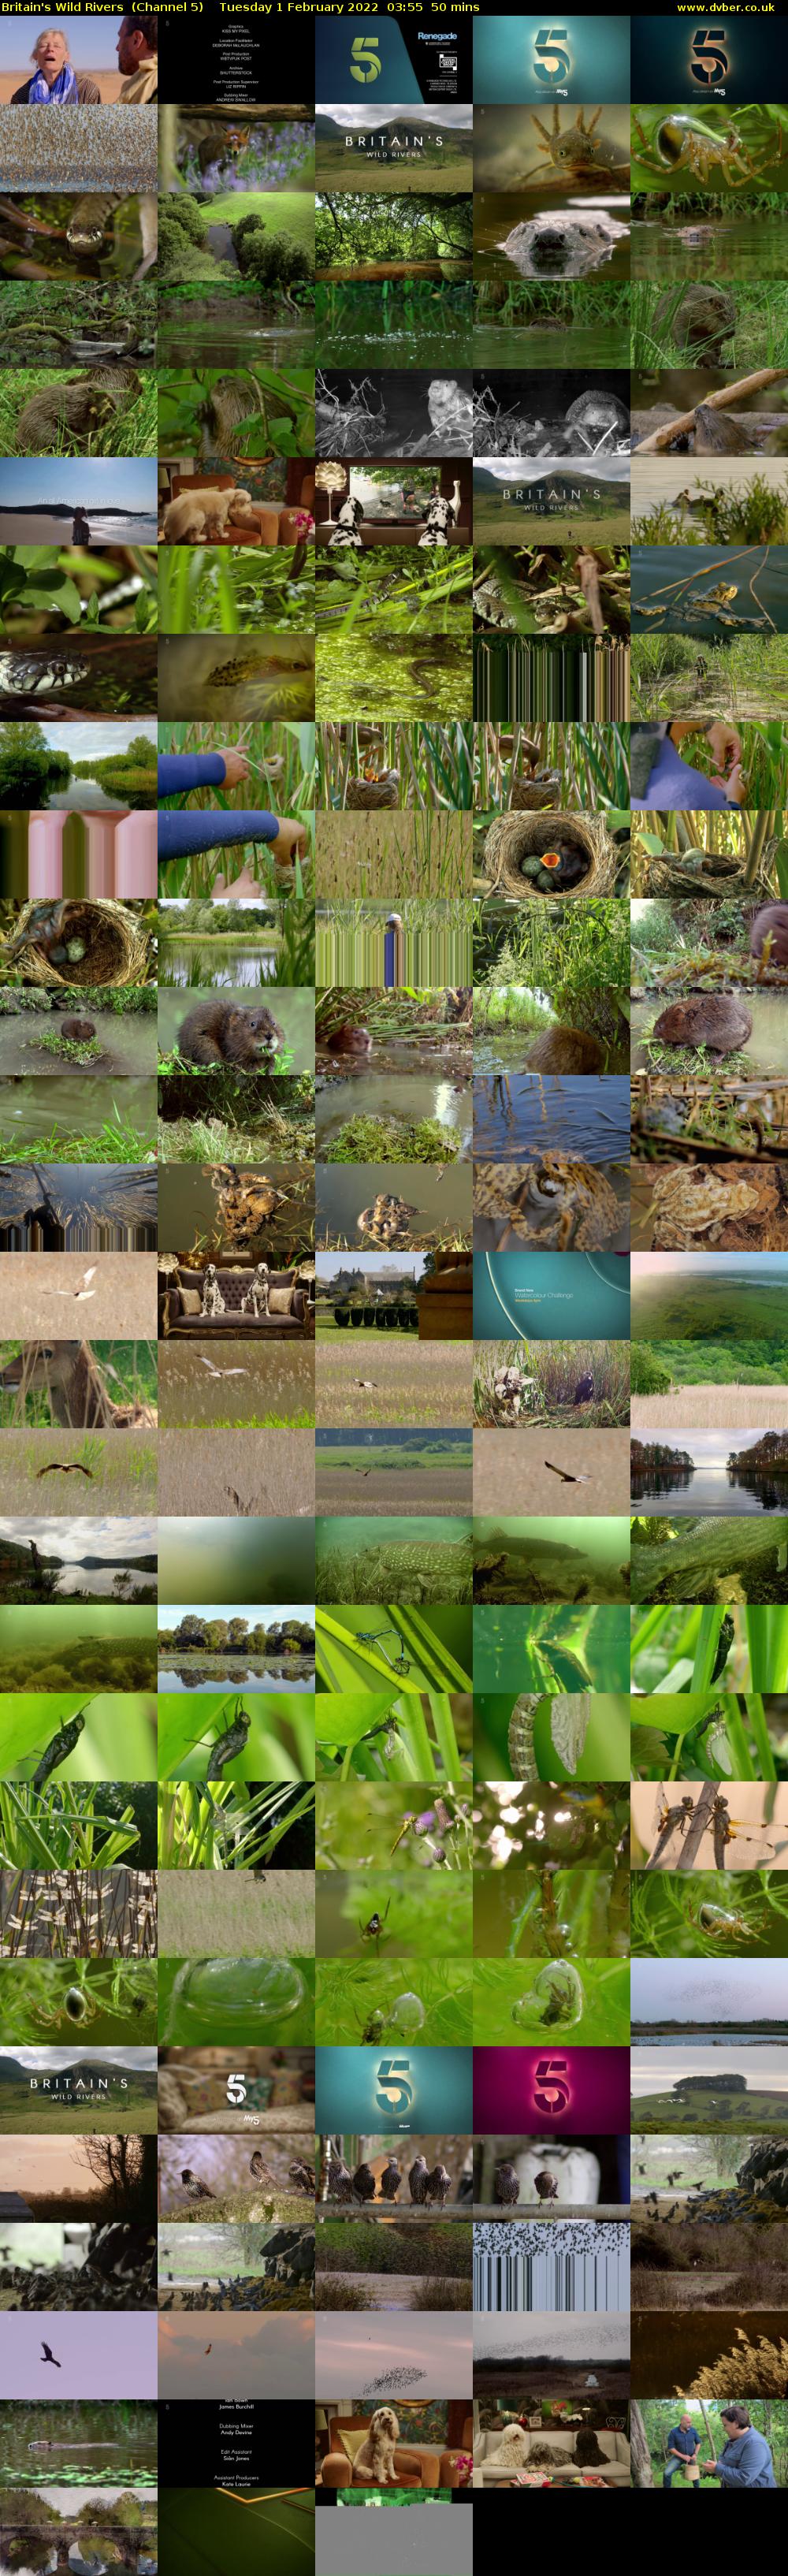 Britain's Wild Rivers  (Channel 5) Tuesday 1 February 2022 03:55 - 04:45